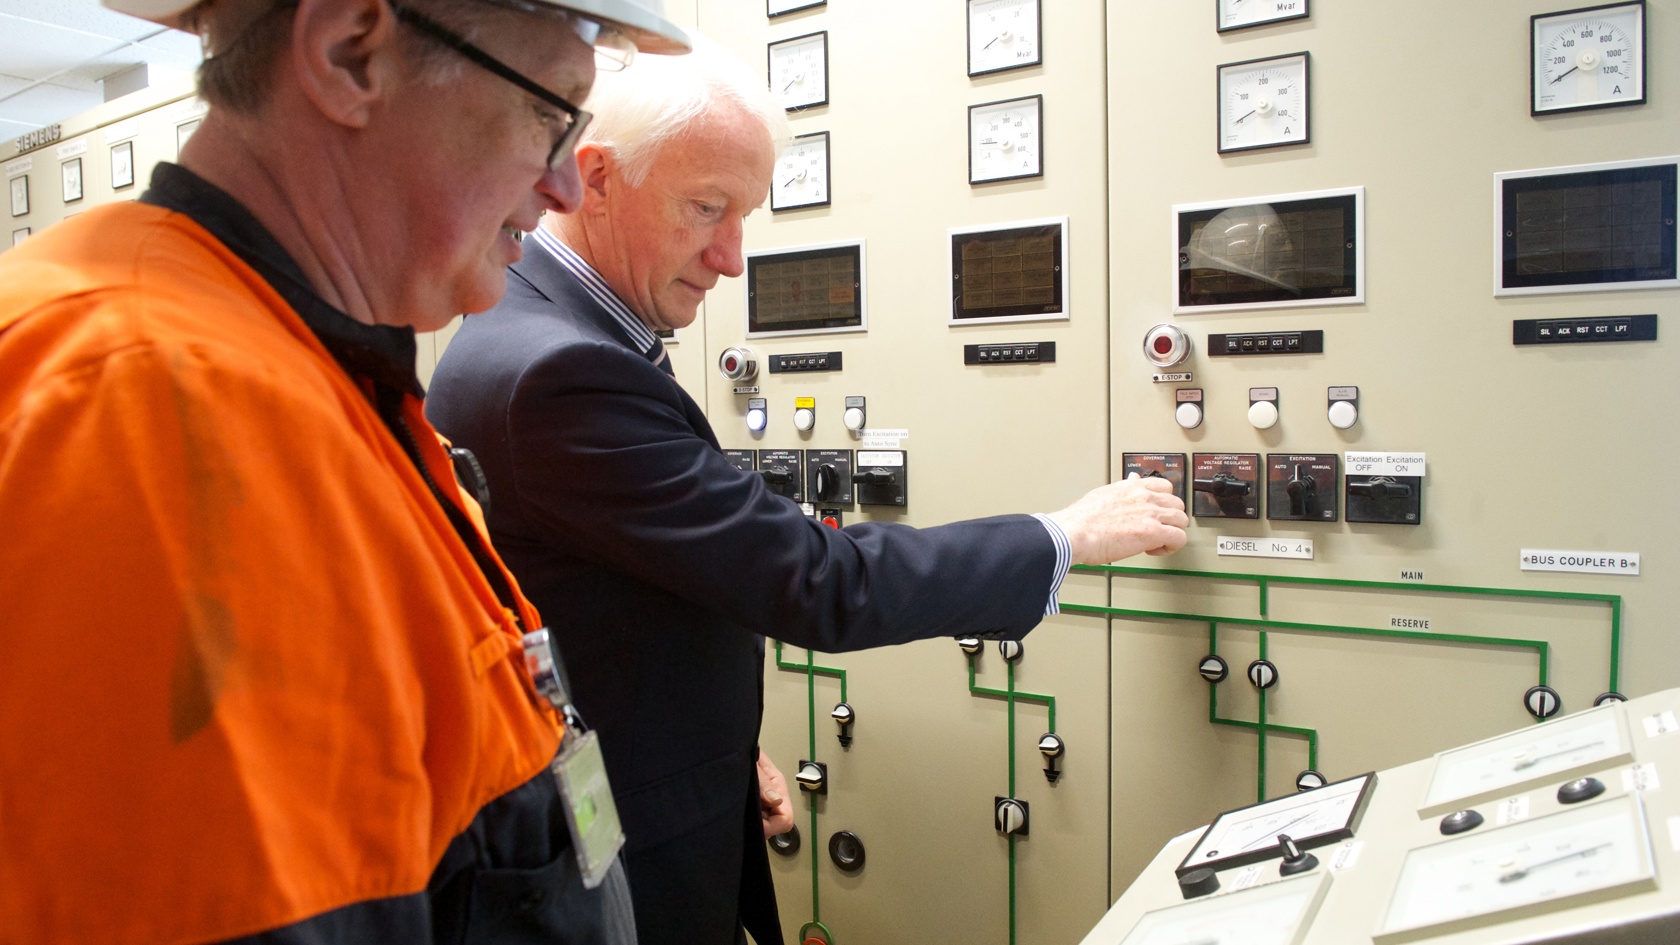 Lieutenant Governor uses switches at La Collette Power Station